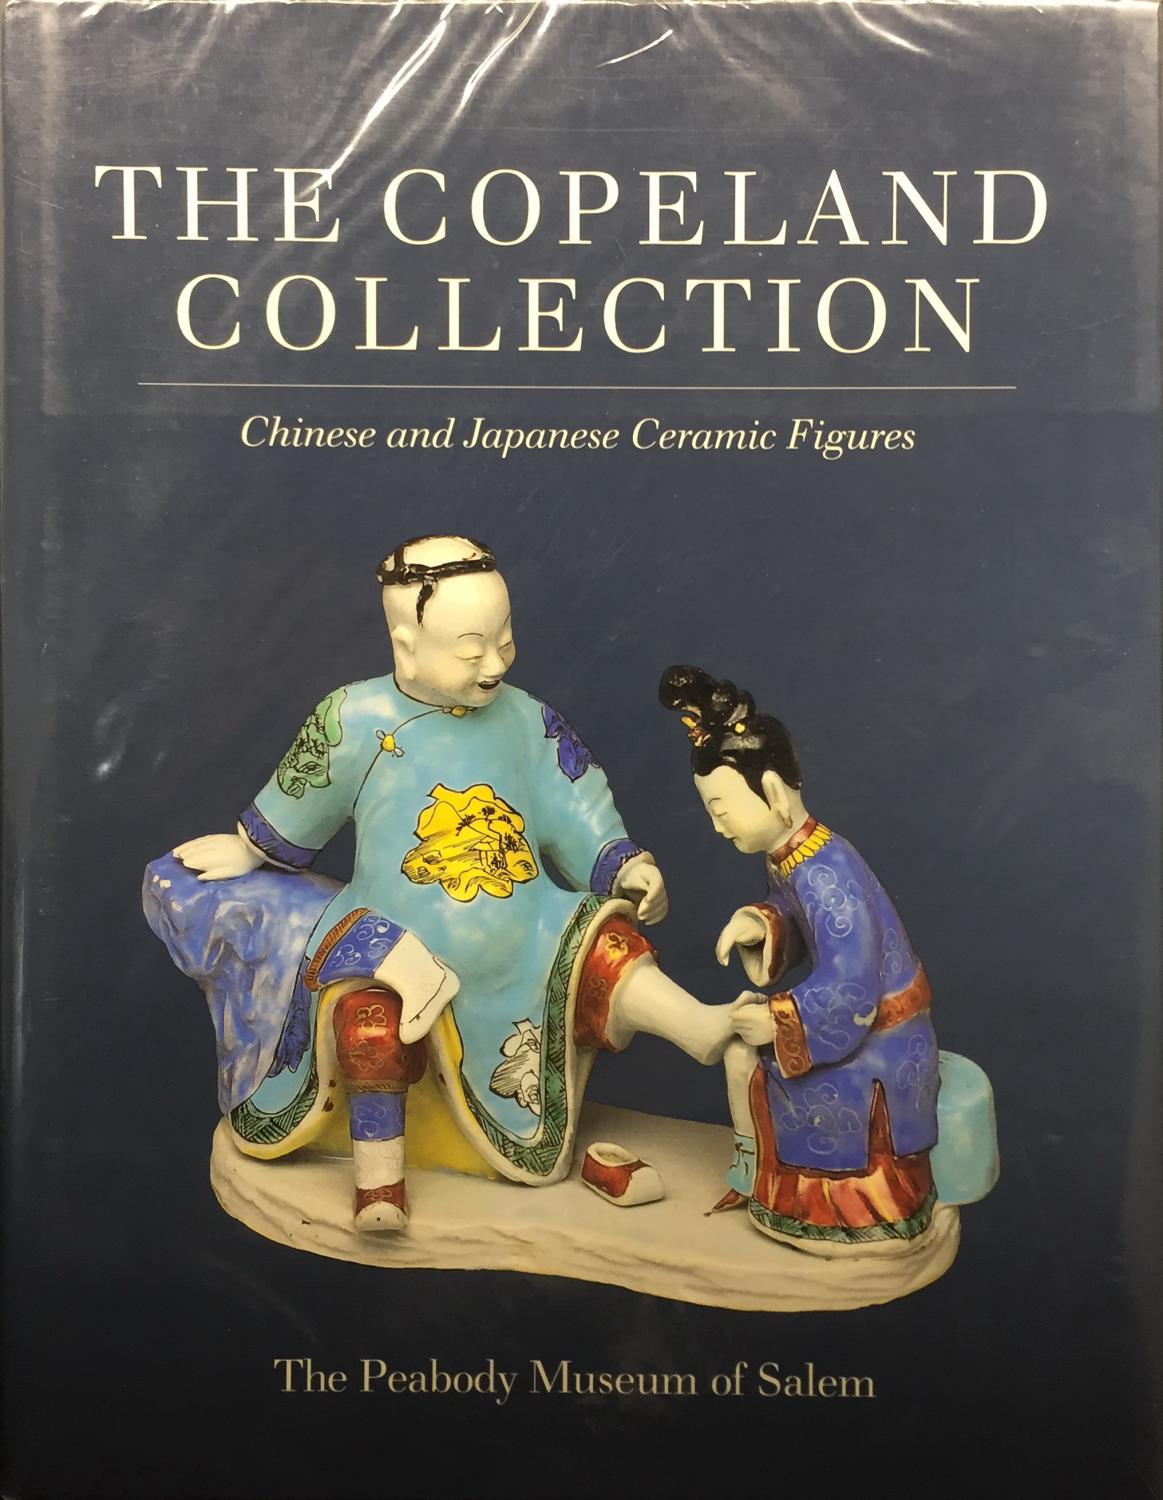 The Copeland Collection: Chinese and Japanese Ceramic Figures - Sargent, William R.